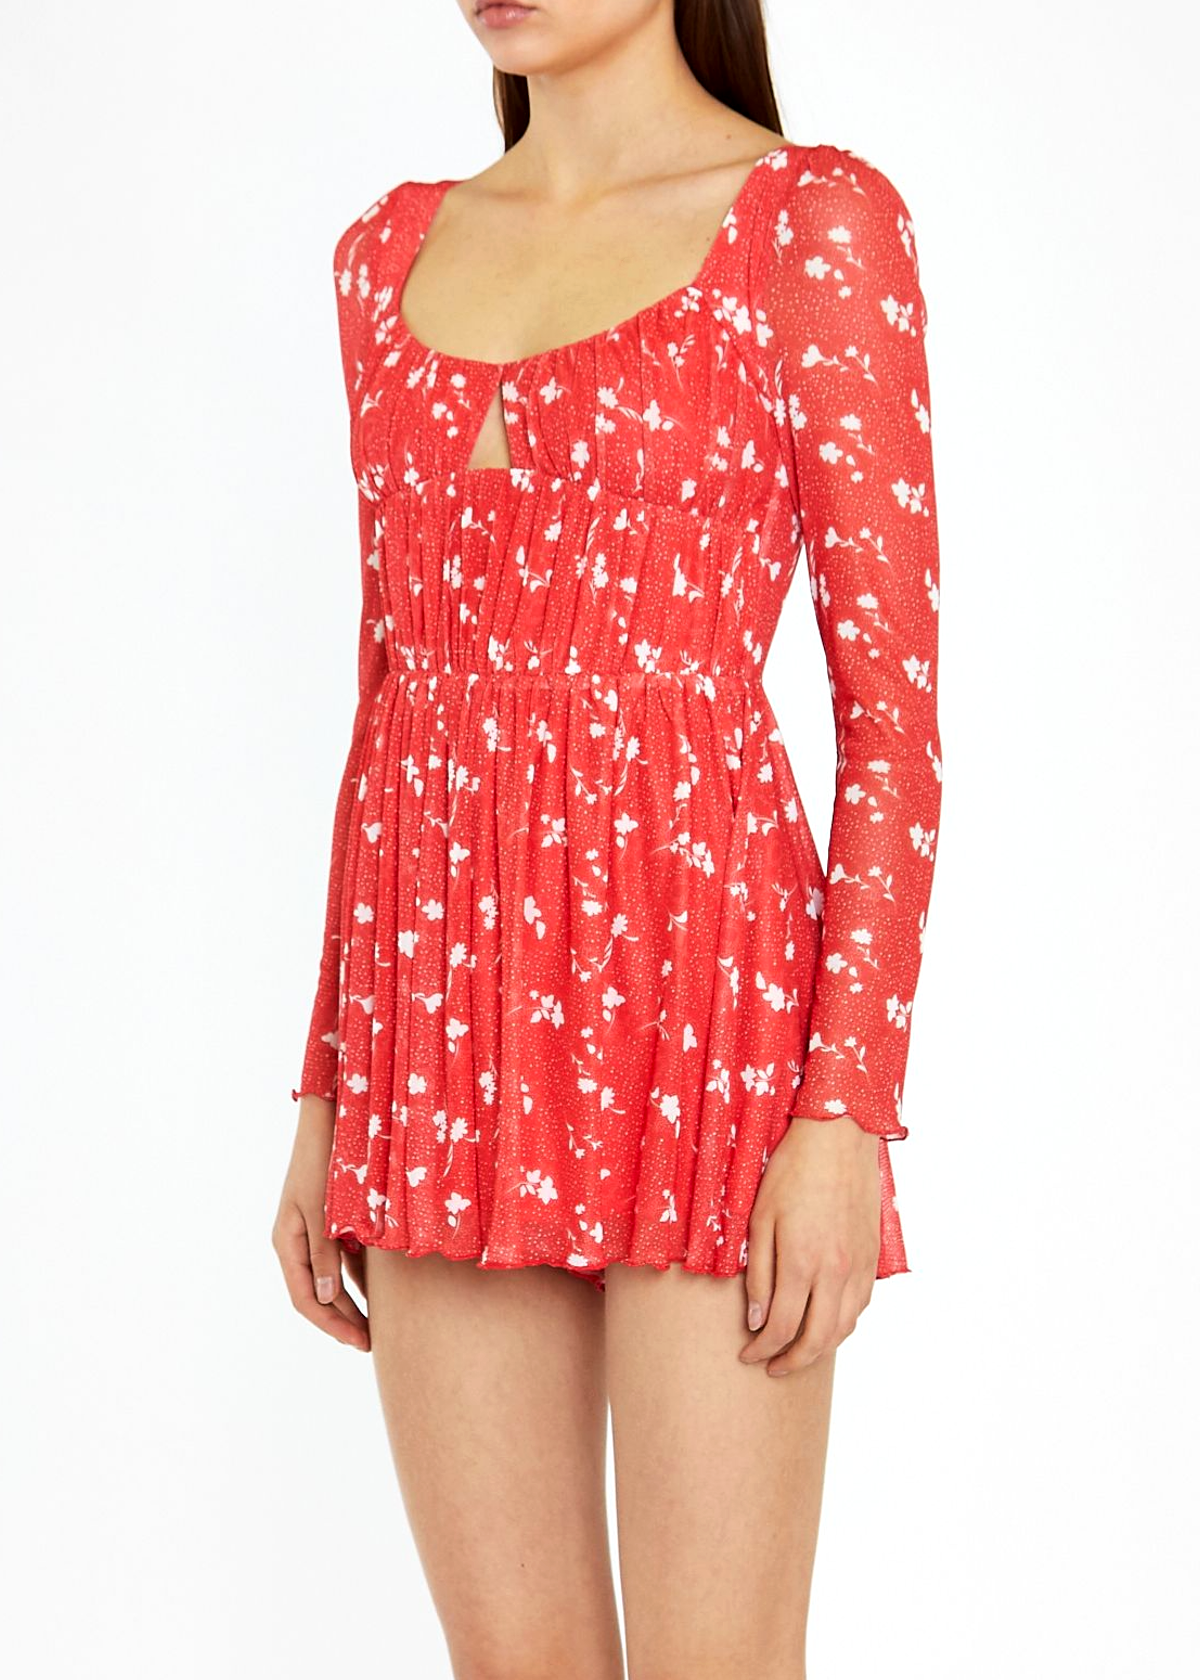 Slinky Stretchy Sun Faded Red and White Floral Mesh Long Sleeve Playsuit Romper by Glamorous UK